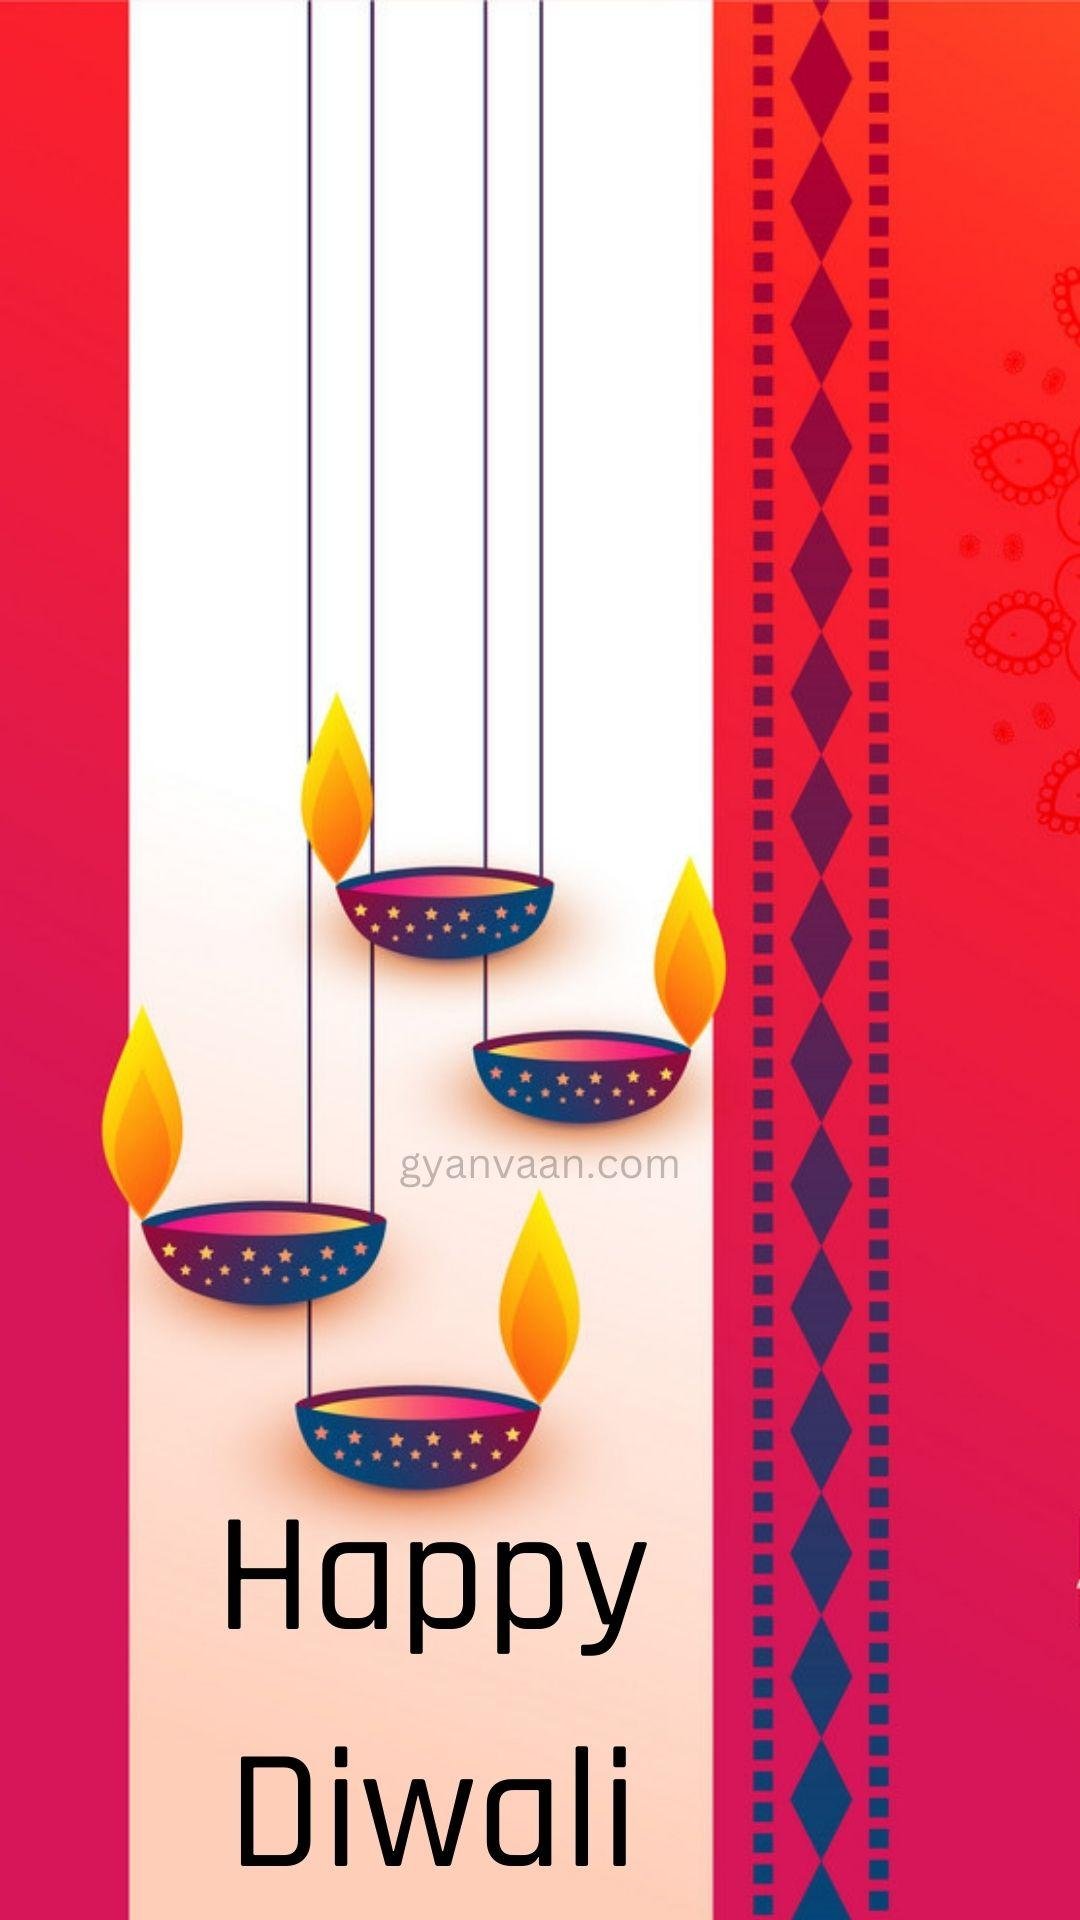 Diwali Quotes In Hindi With Wishes25 - Diwali Quotes In Hindi